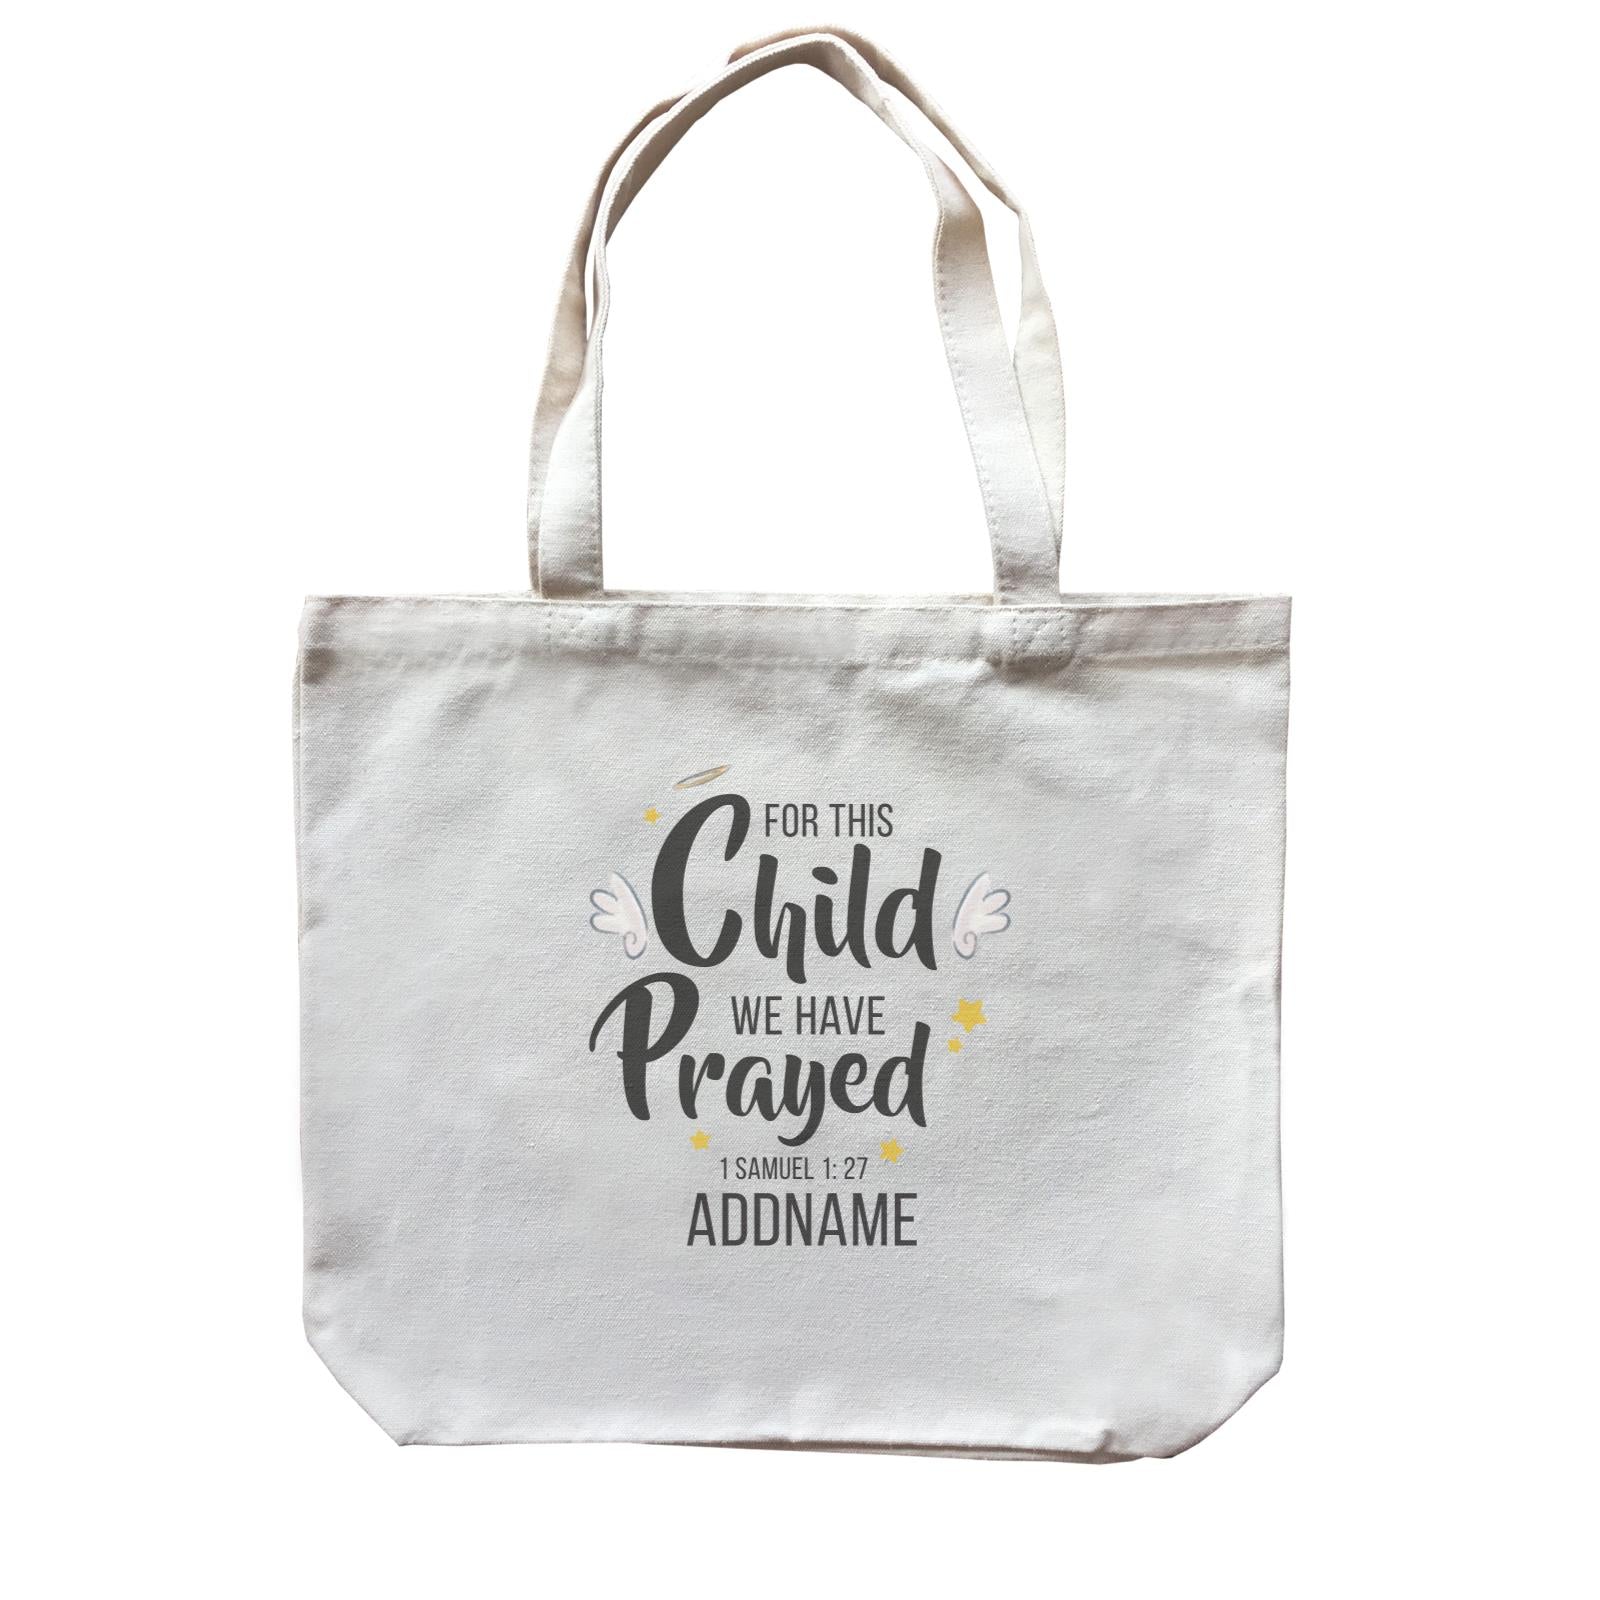 Gods Gift For This Child We Have Prayed 1 Samuel 1.27 Addname Canvas Bag